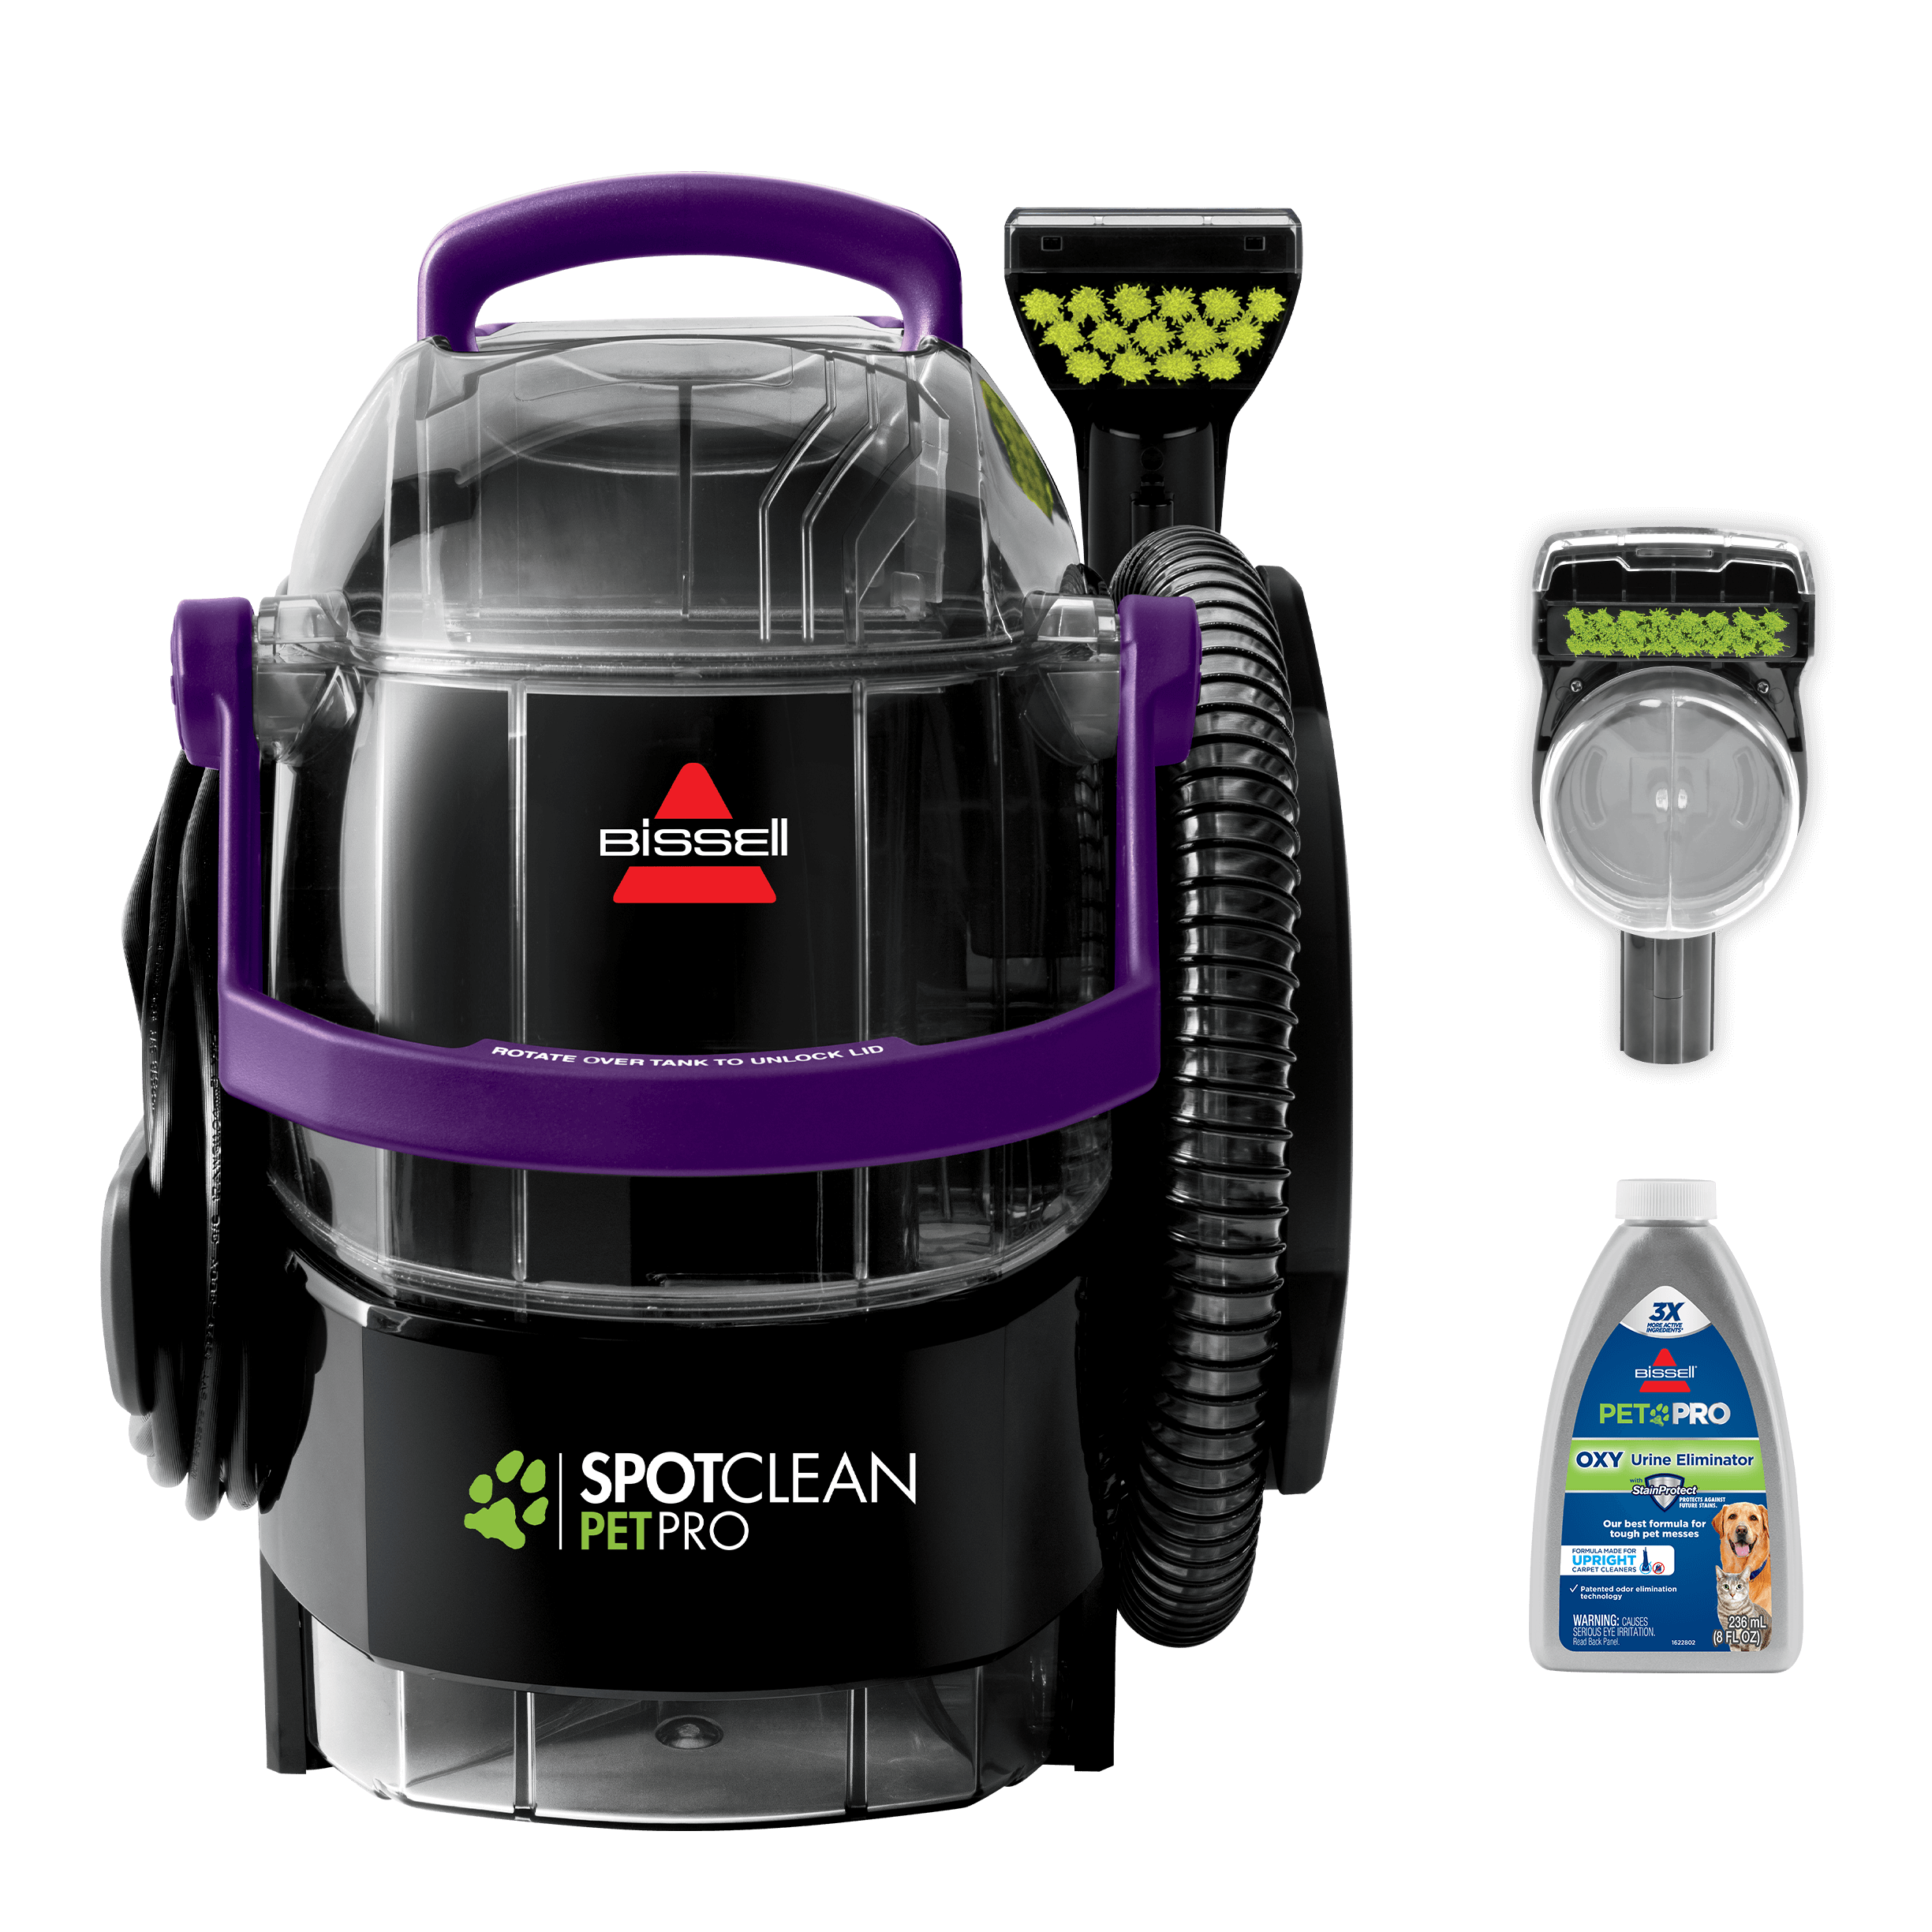 Bissell Spotclean Pro Portable Carpet Cleaner & Reviews